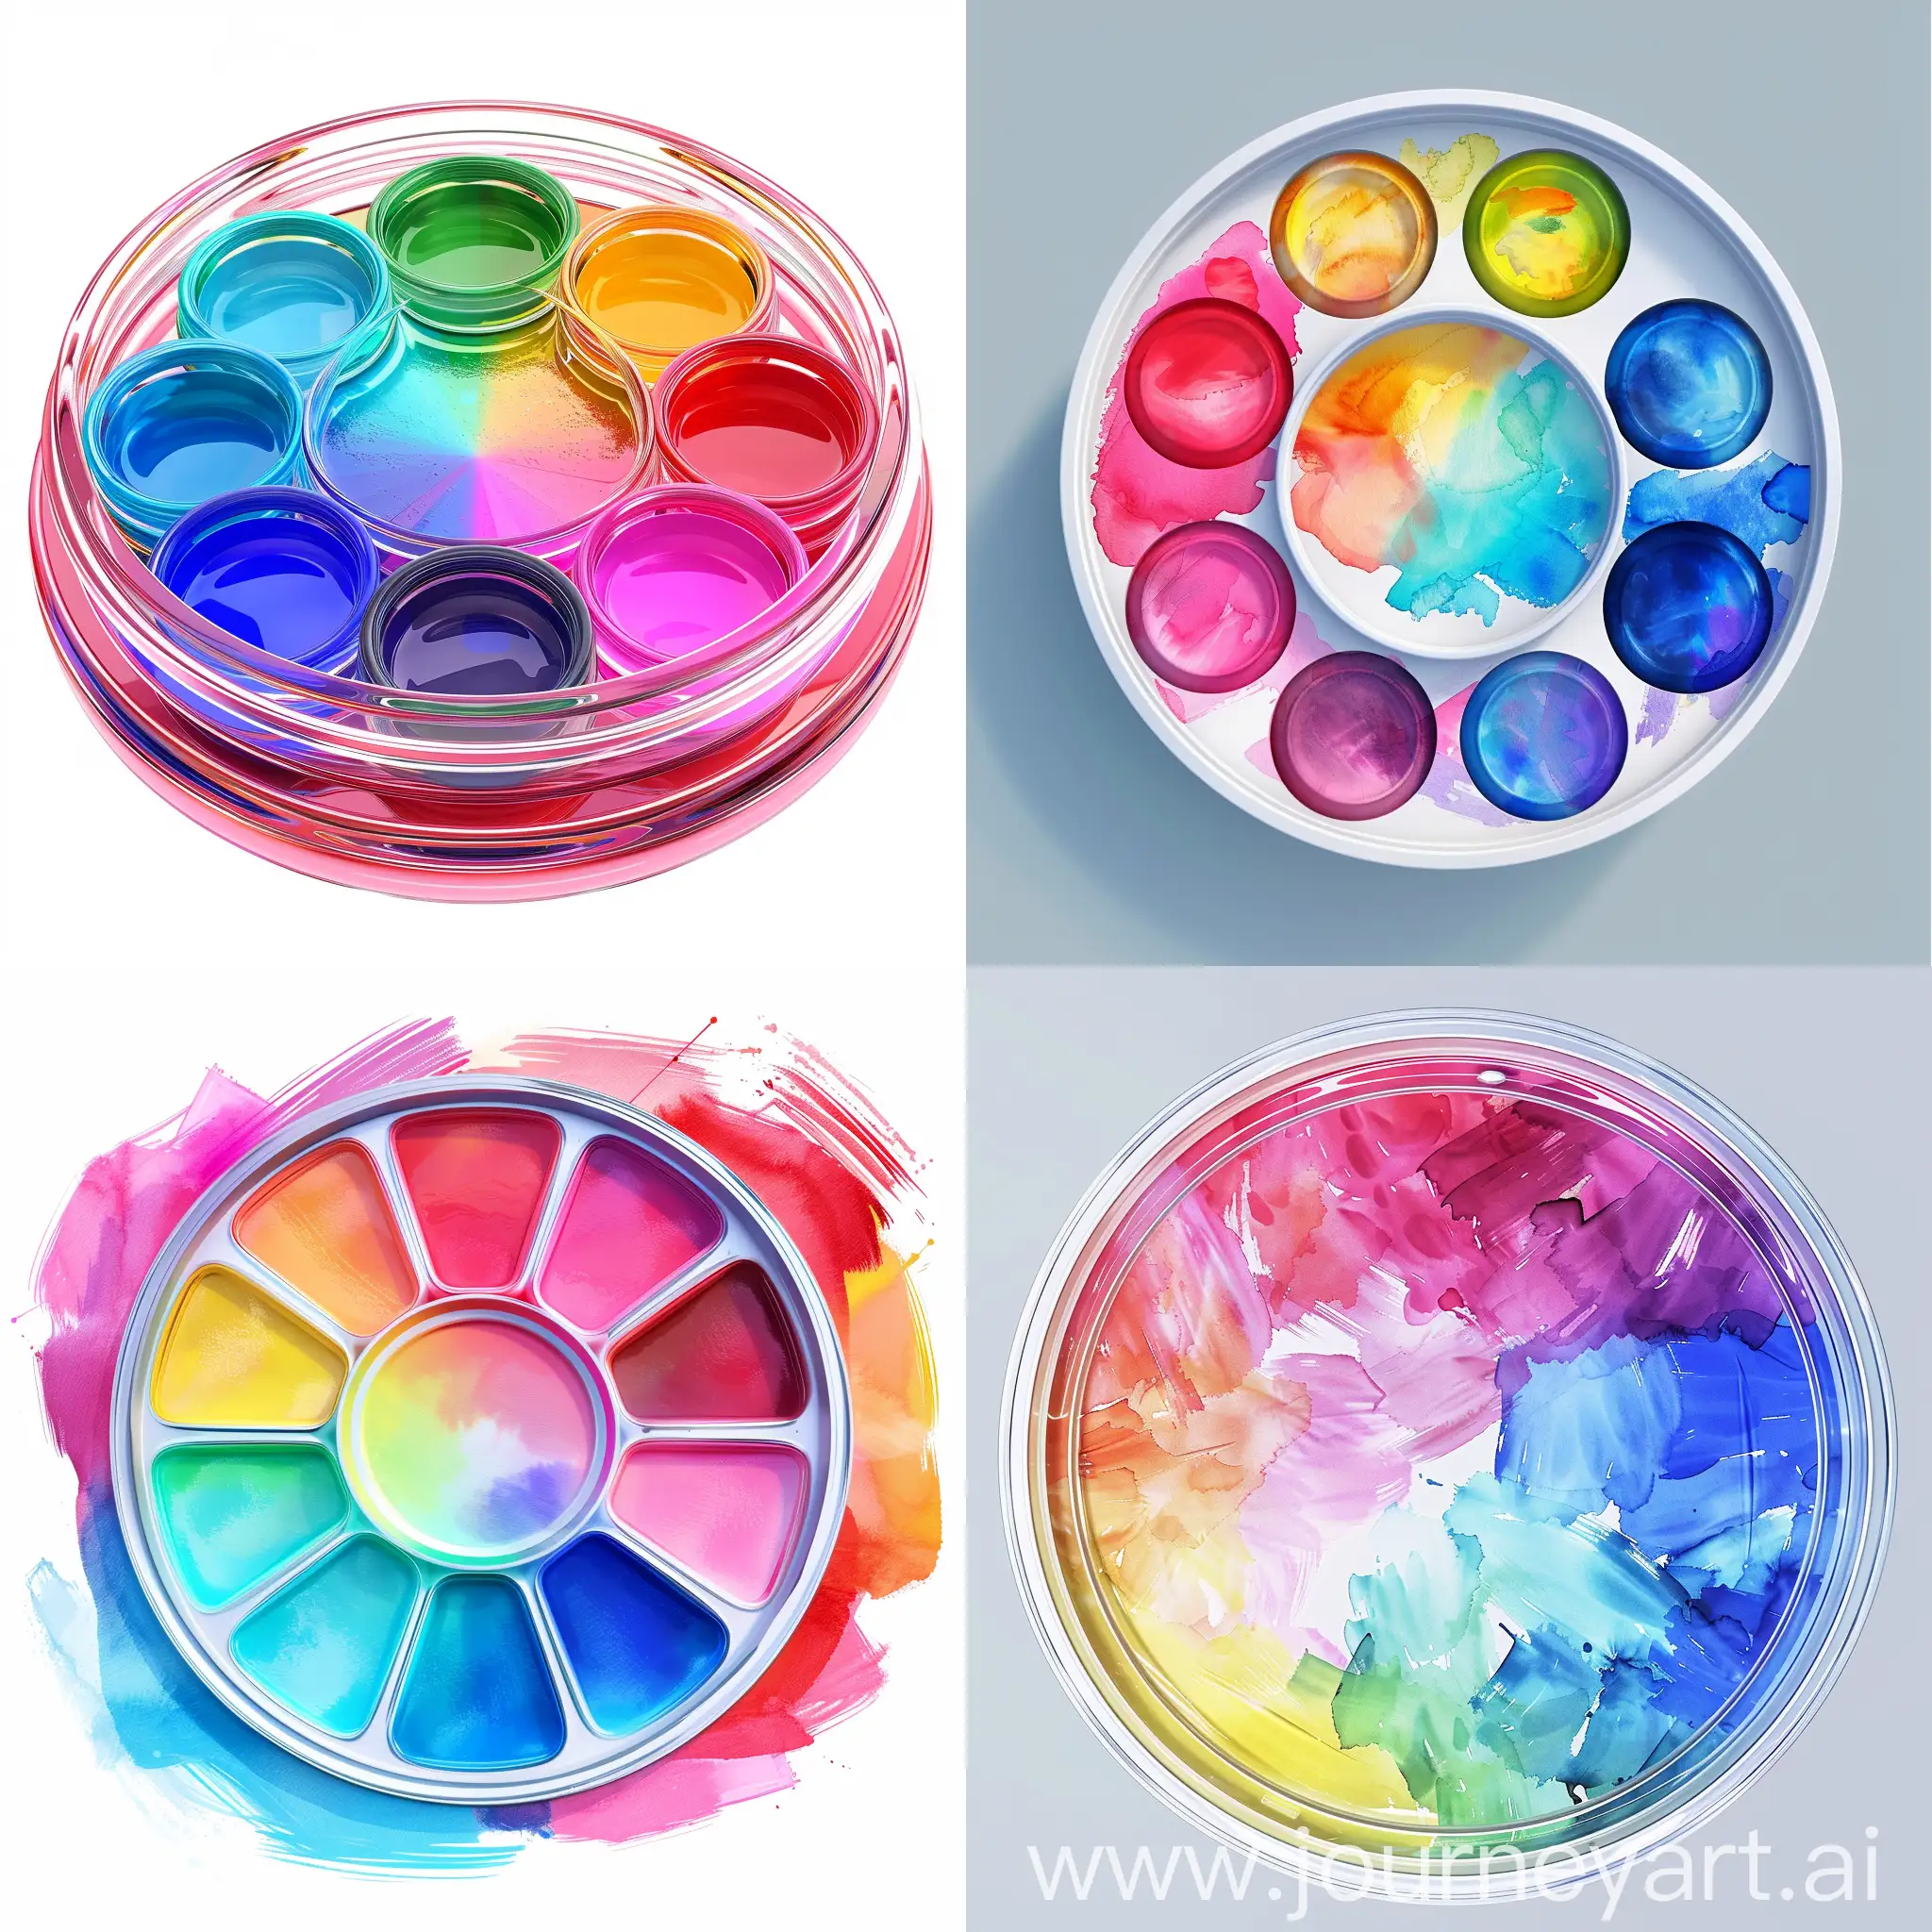 Circular-Watercolor-Paint-Kit-with-Vibrant-Colors-and-Gradients